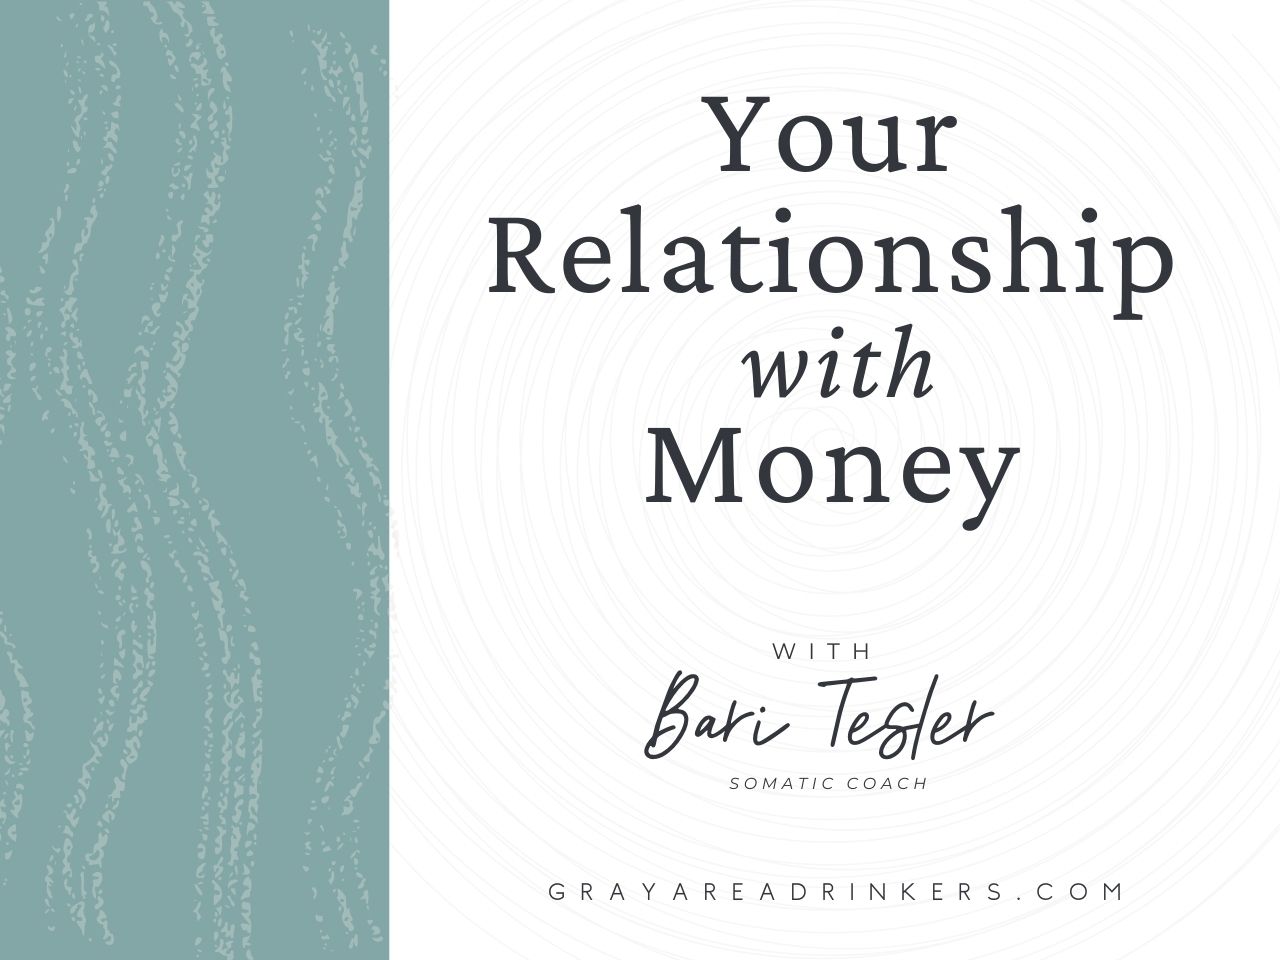 Masterclass - Your Relationship with Money